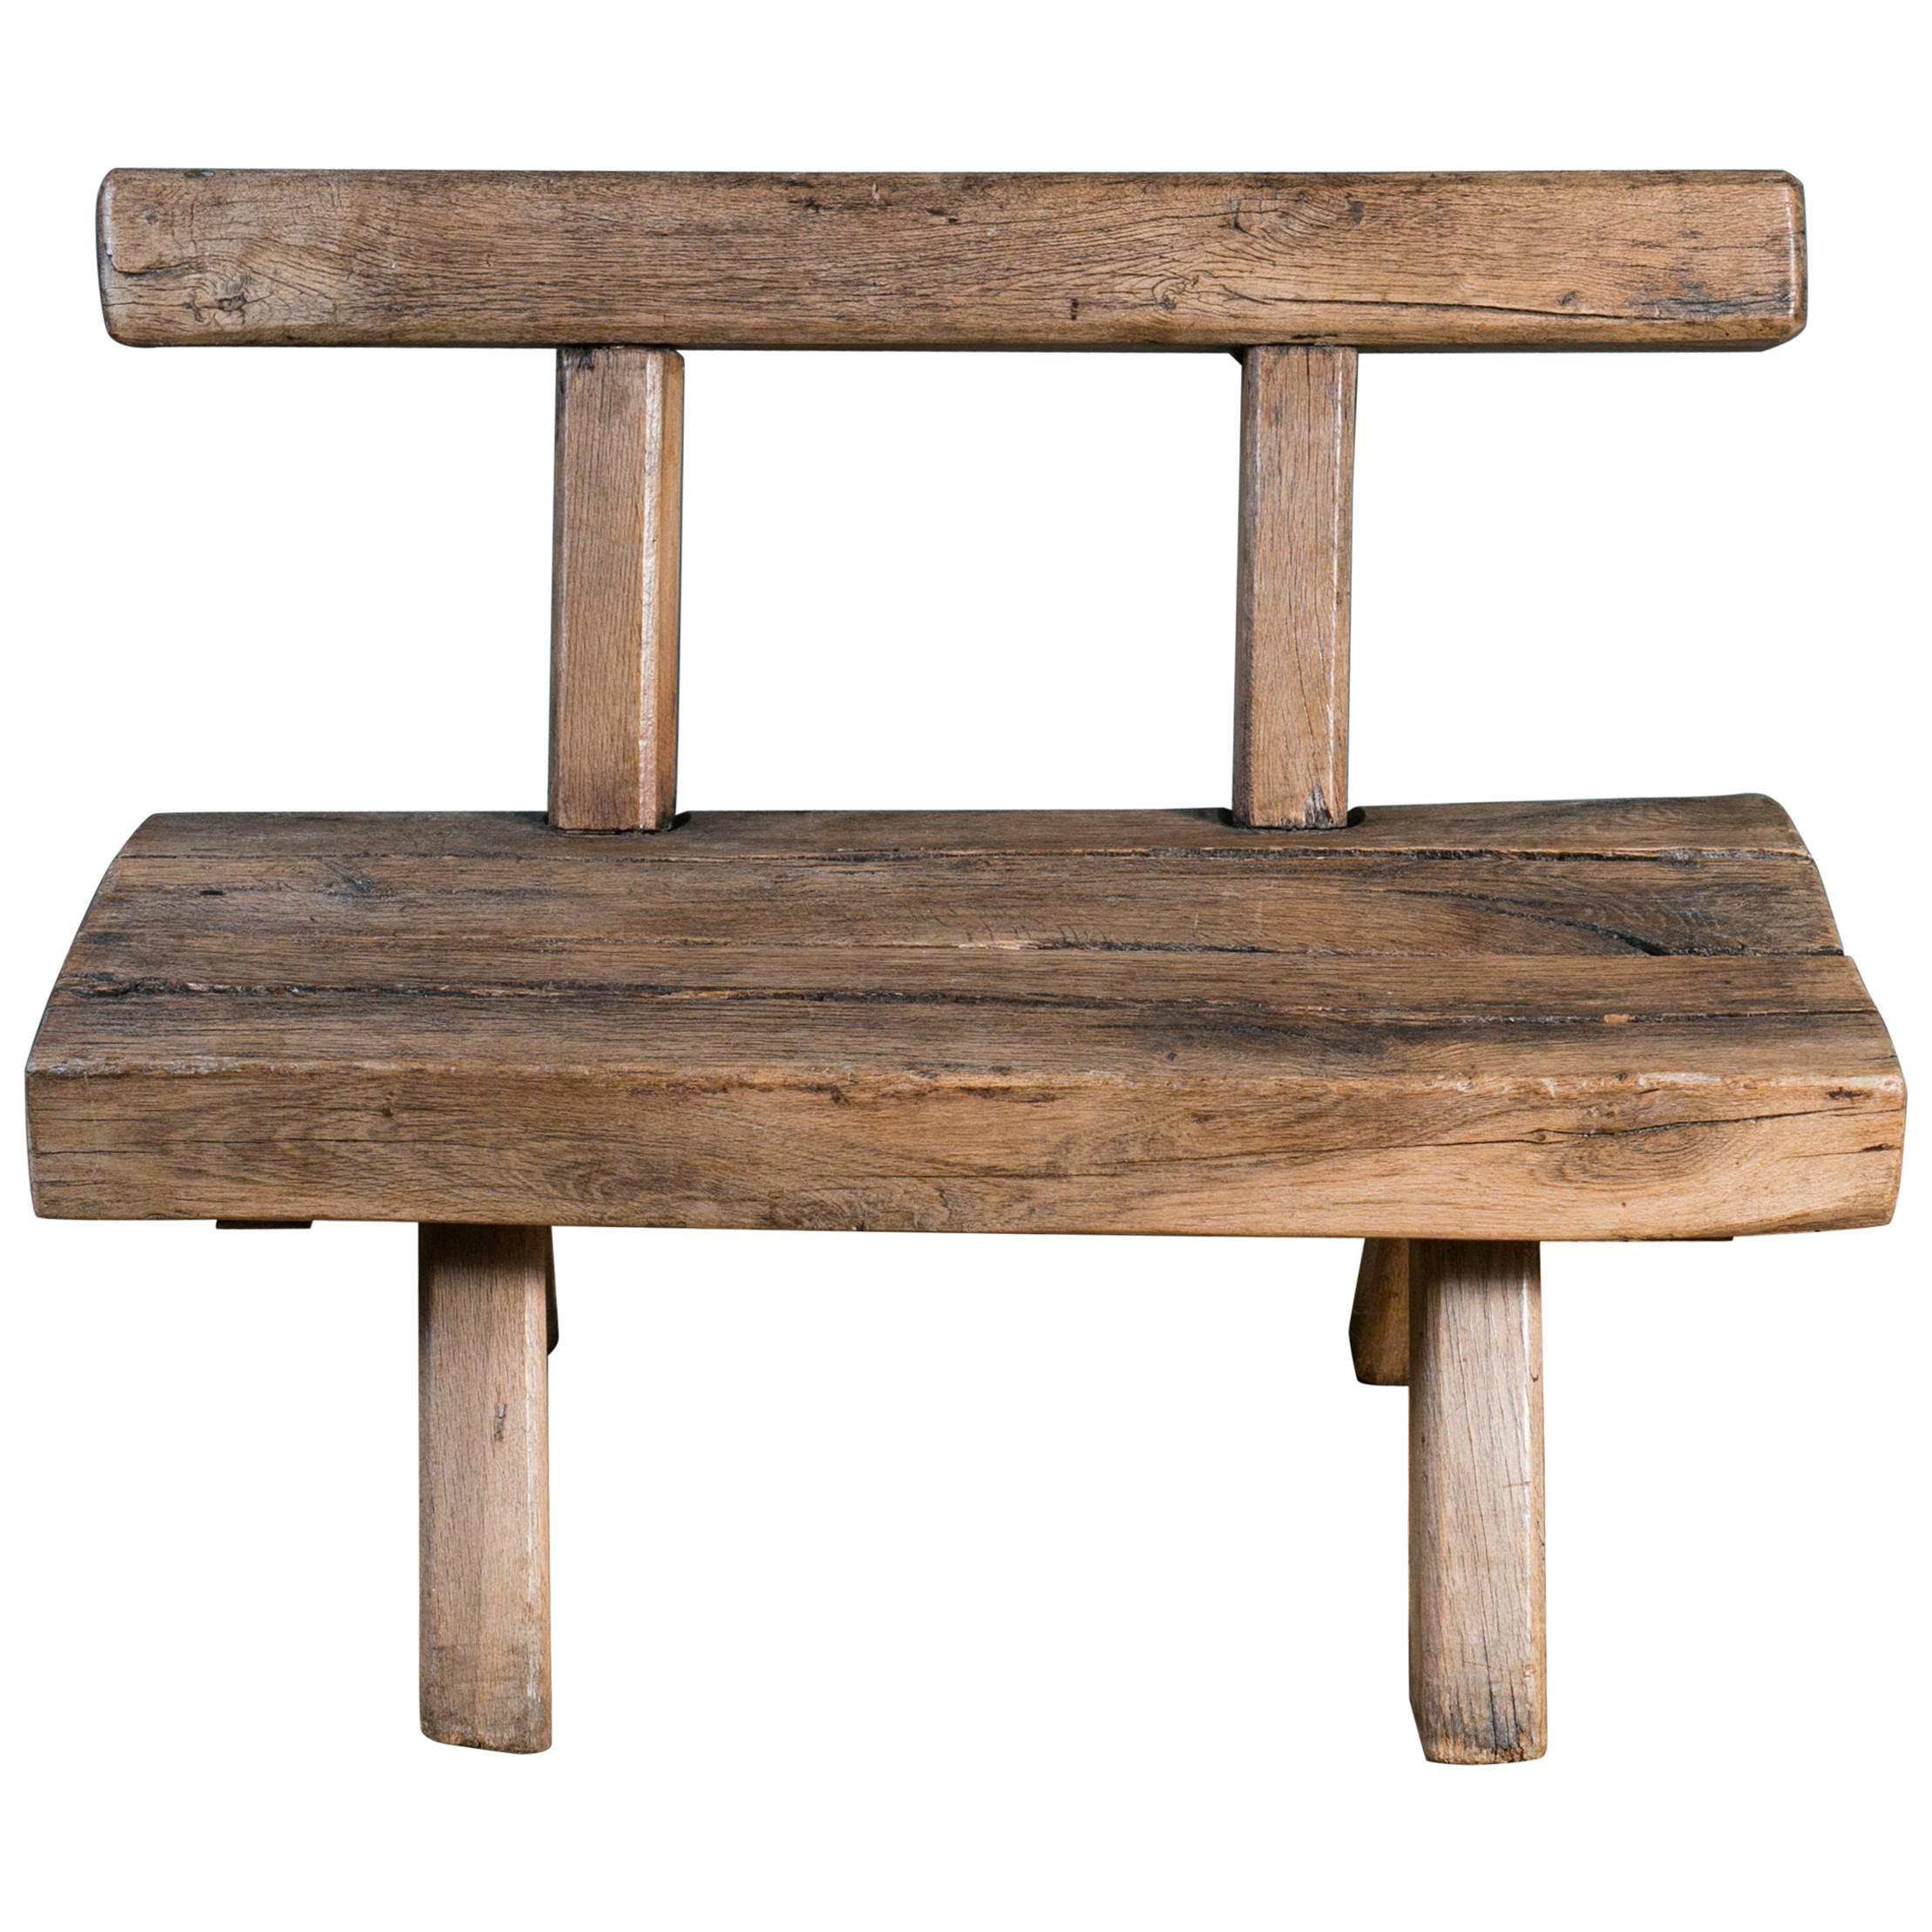 Chunky Rustic Wooden Bench with Back, circa 1920